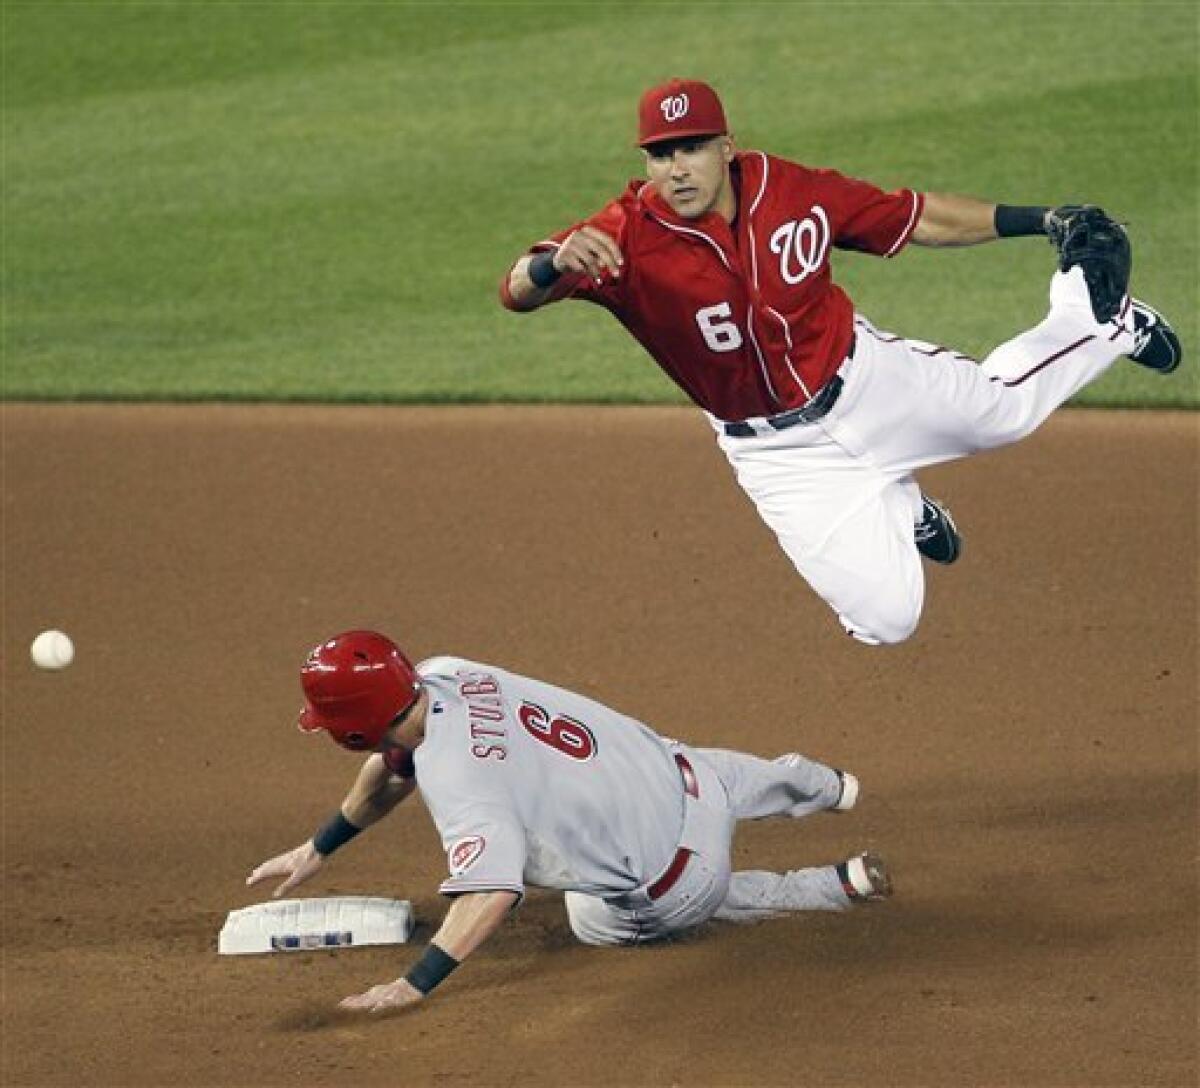 Desmond has winning RBI, is thrown out as Nats win - The San Diego  Union-Tribune